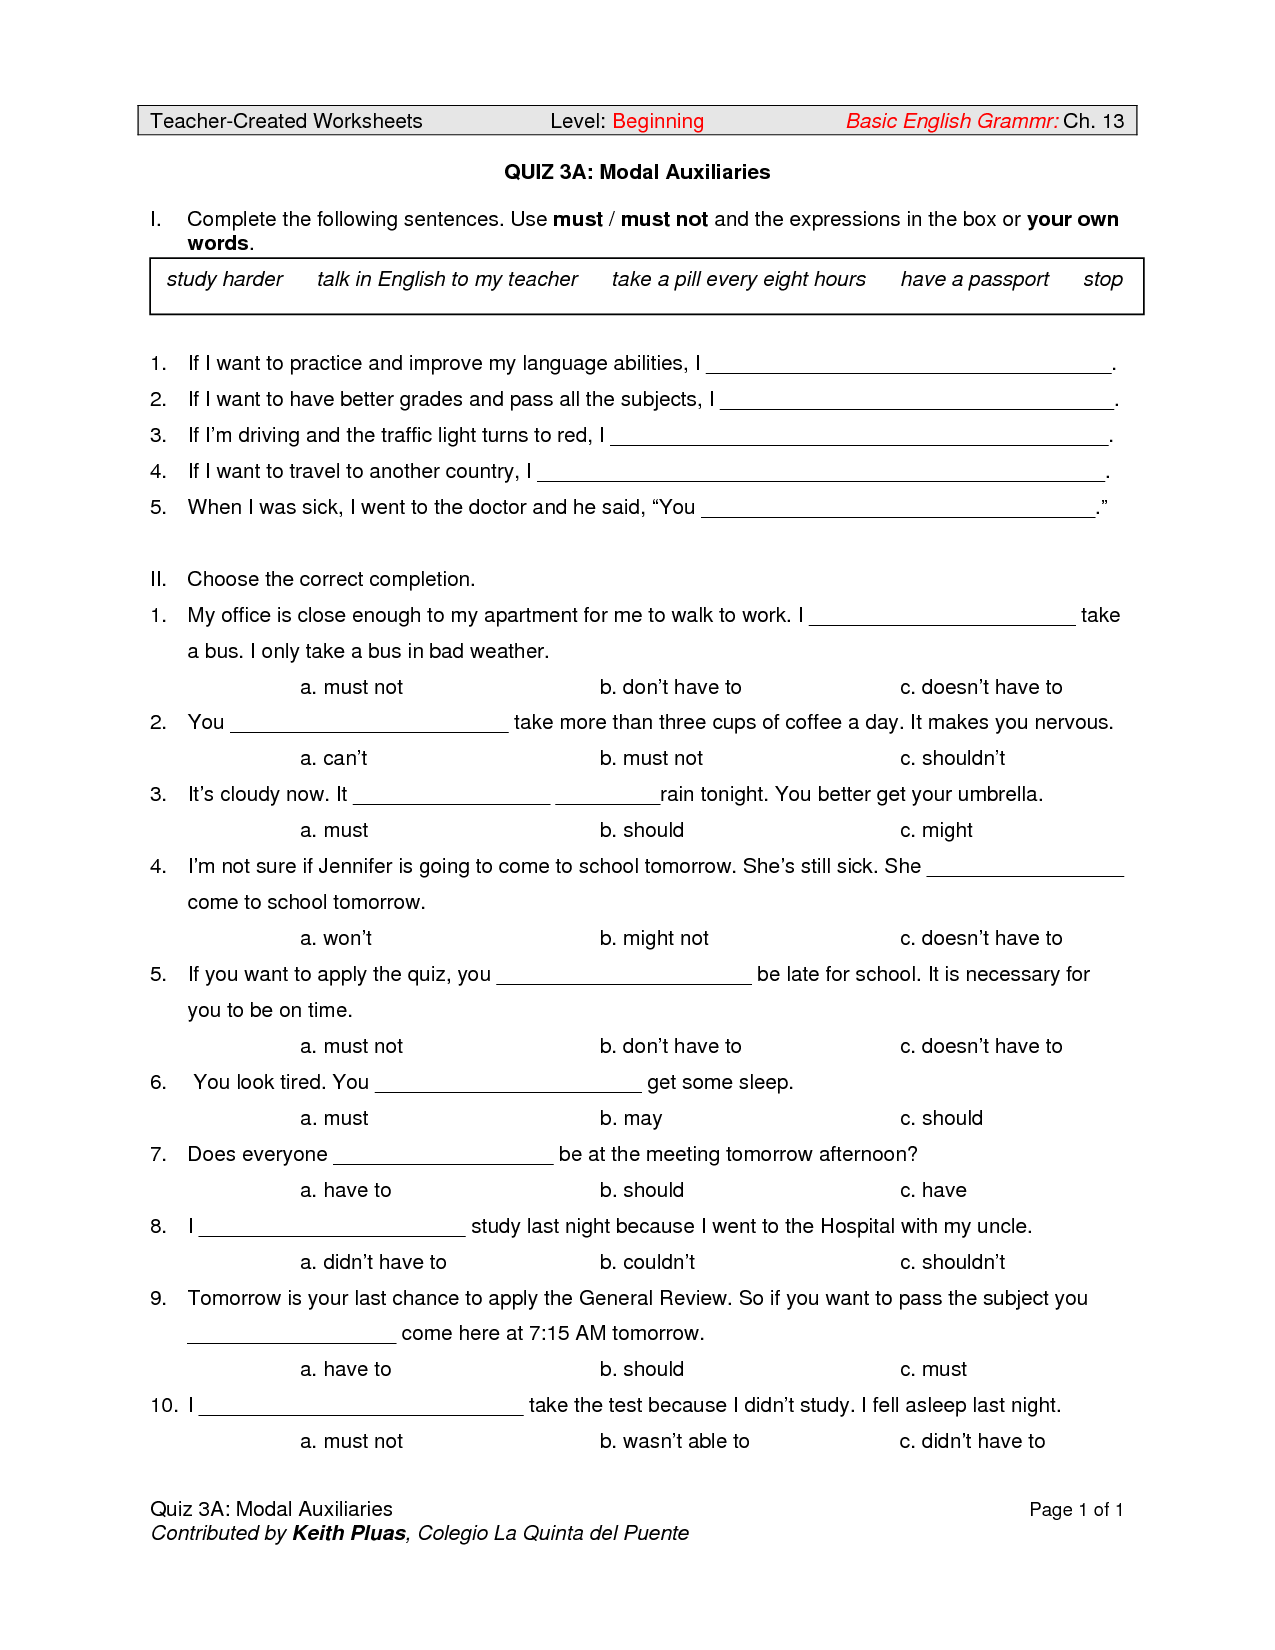 Auxiliary Verb Worksheets For Grade 5